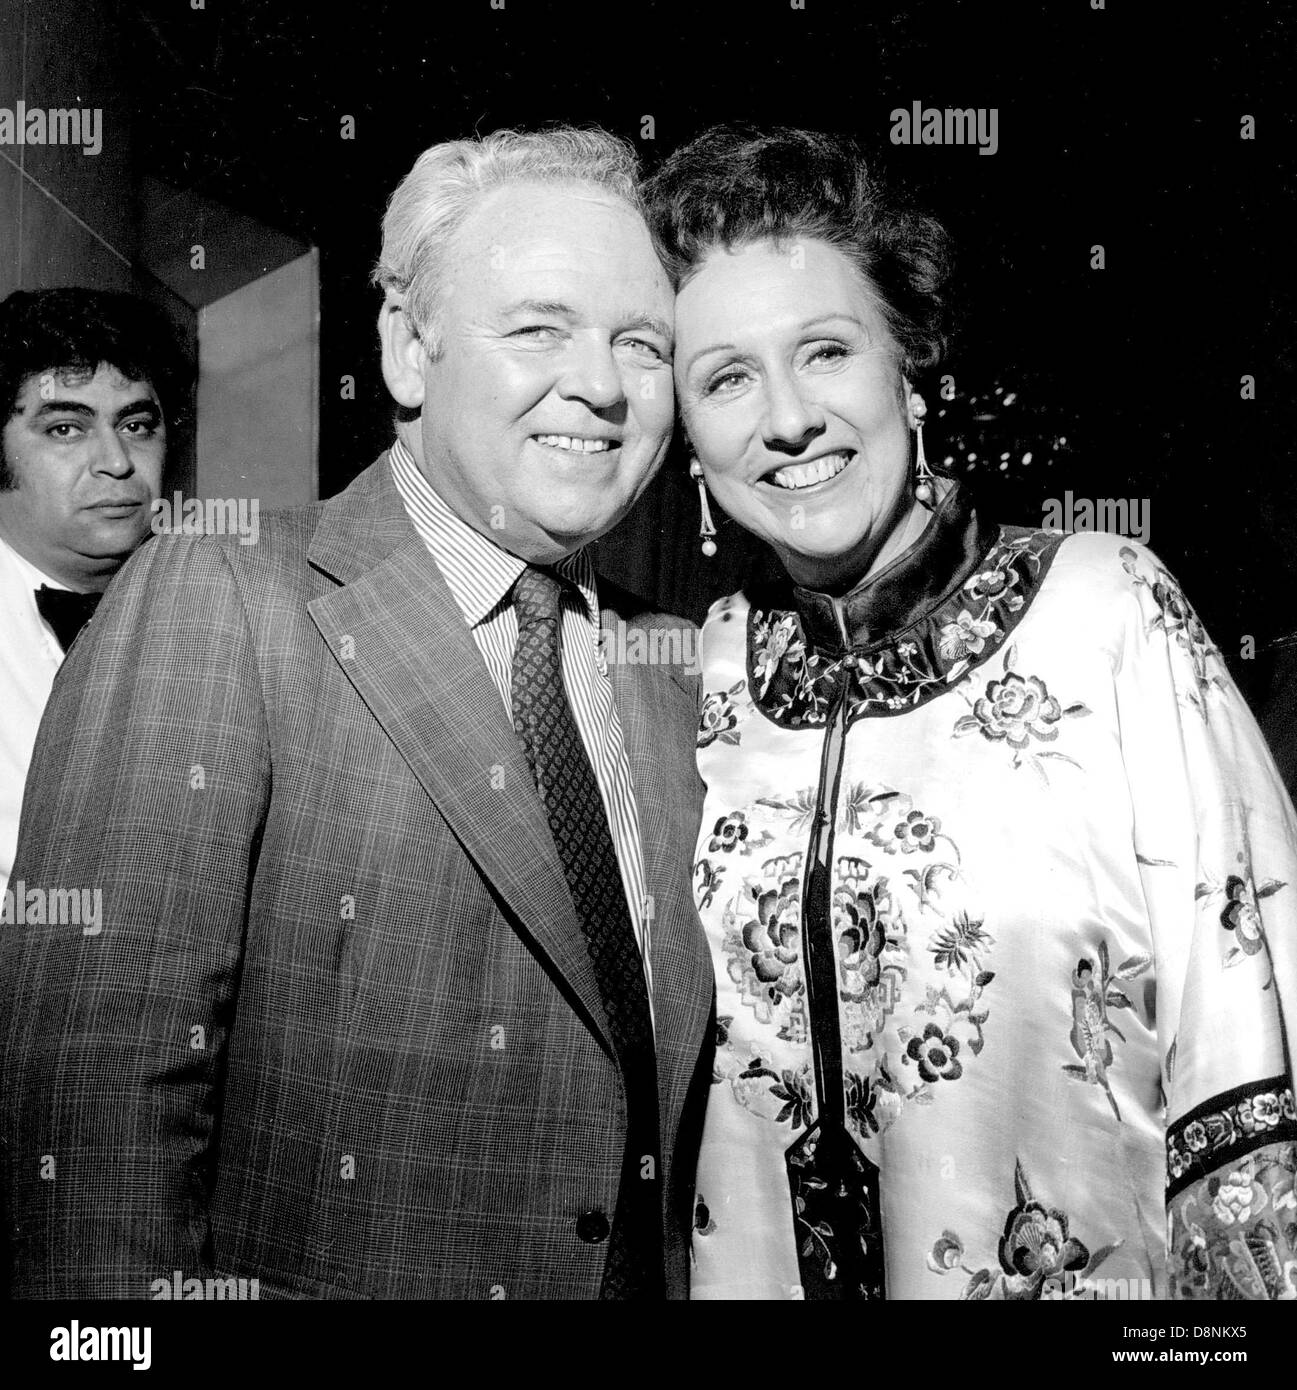 FILE PHOTO - JEAN STAPLETON, the veteran of stage and film best known as Archie Bunker's long-suffering wife Edith in the seminal TV series 'All In The Family,' died Friday May 31, 2013 at her home in New York City. She was 90. PICTURED: Jan. 1, 1978 - Los Angeles, California, U.S. - Undated photo of JEAN STAPLETON AND CARROLL O'CONNOR. (Credit Image: © Nate Cutler/Globe Photos/ZUMAPRESS.com) Stock Photo